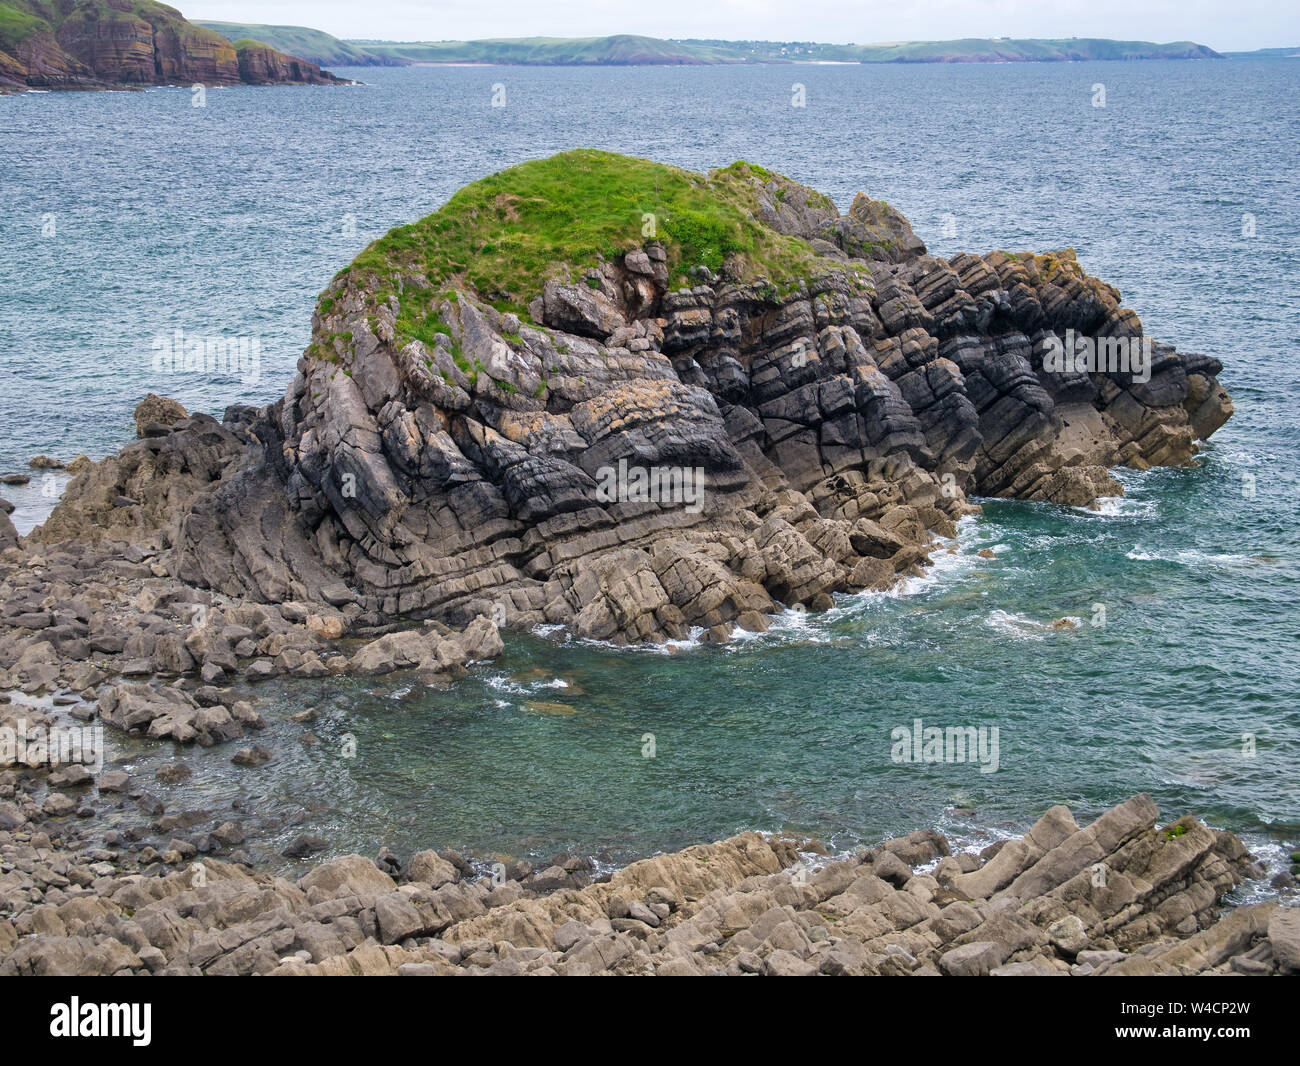 Geological folds and inclines in rock strata in coastal rocks in Pembrokeshire, South Wales, UK, as viewed from the Coast Path. Stock Photo